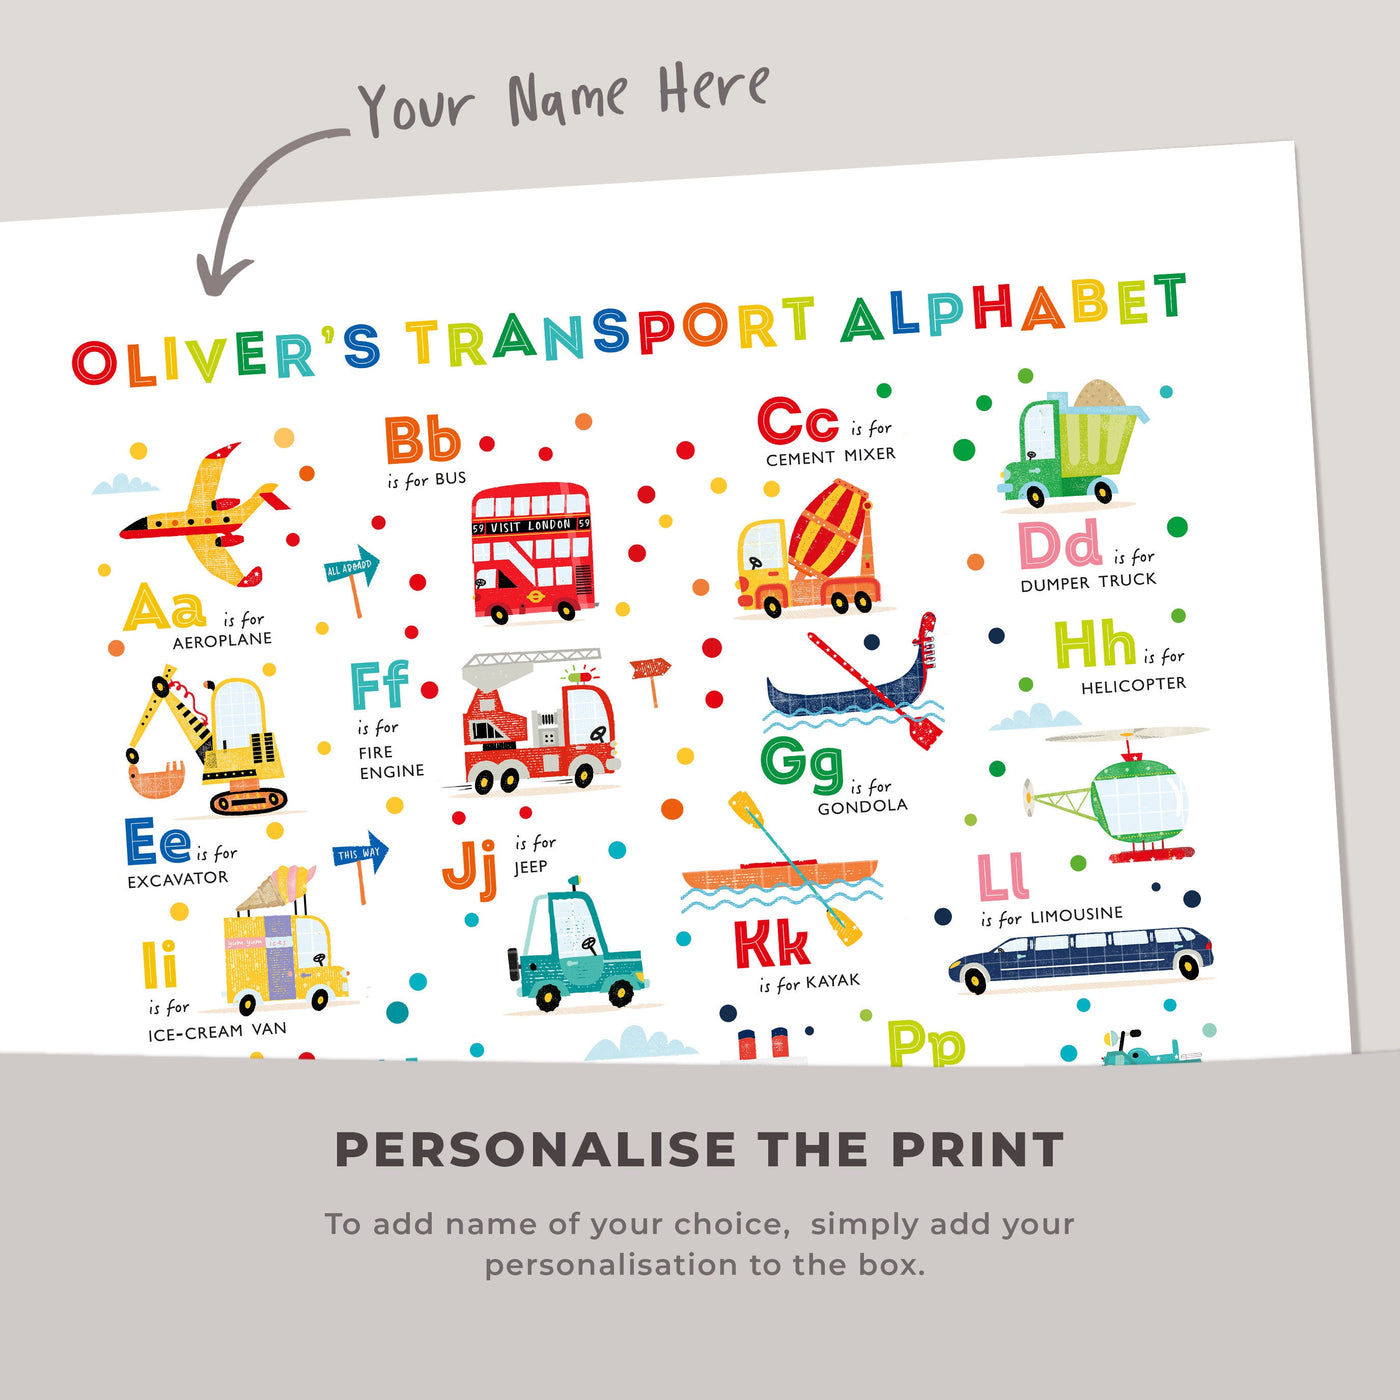 Transport Alphabet Poster, Bright Title ABC Print - Can Be Personalised. - PaperPaintPixels